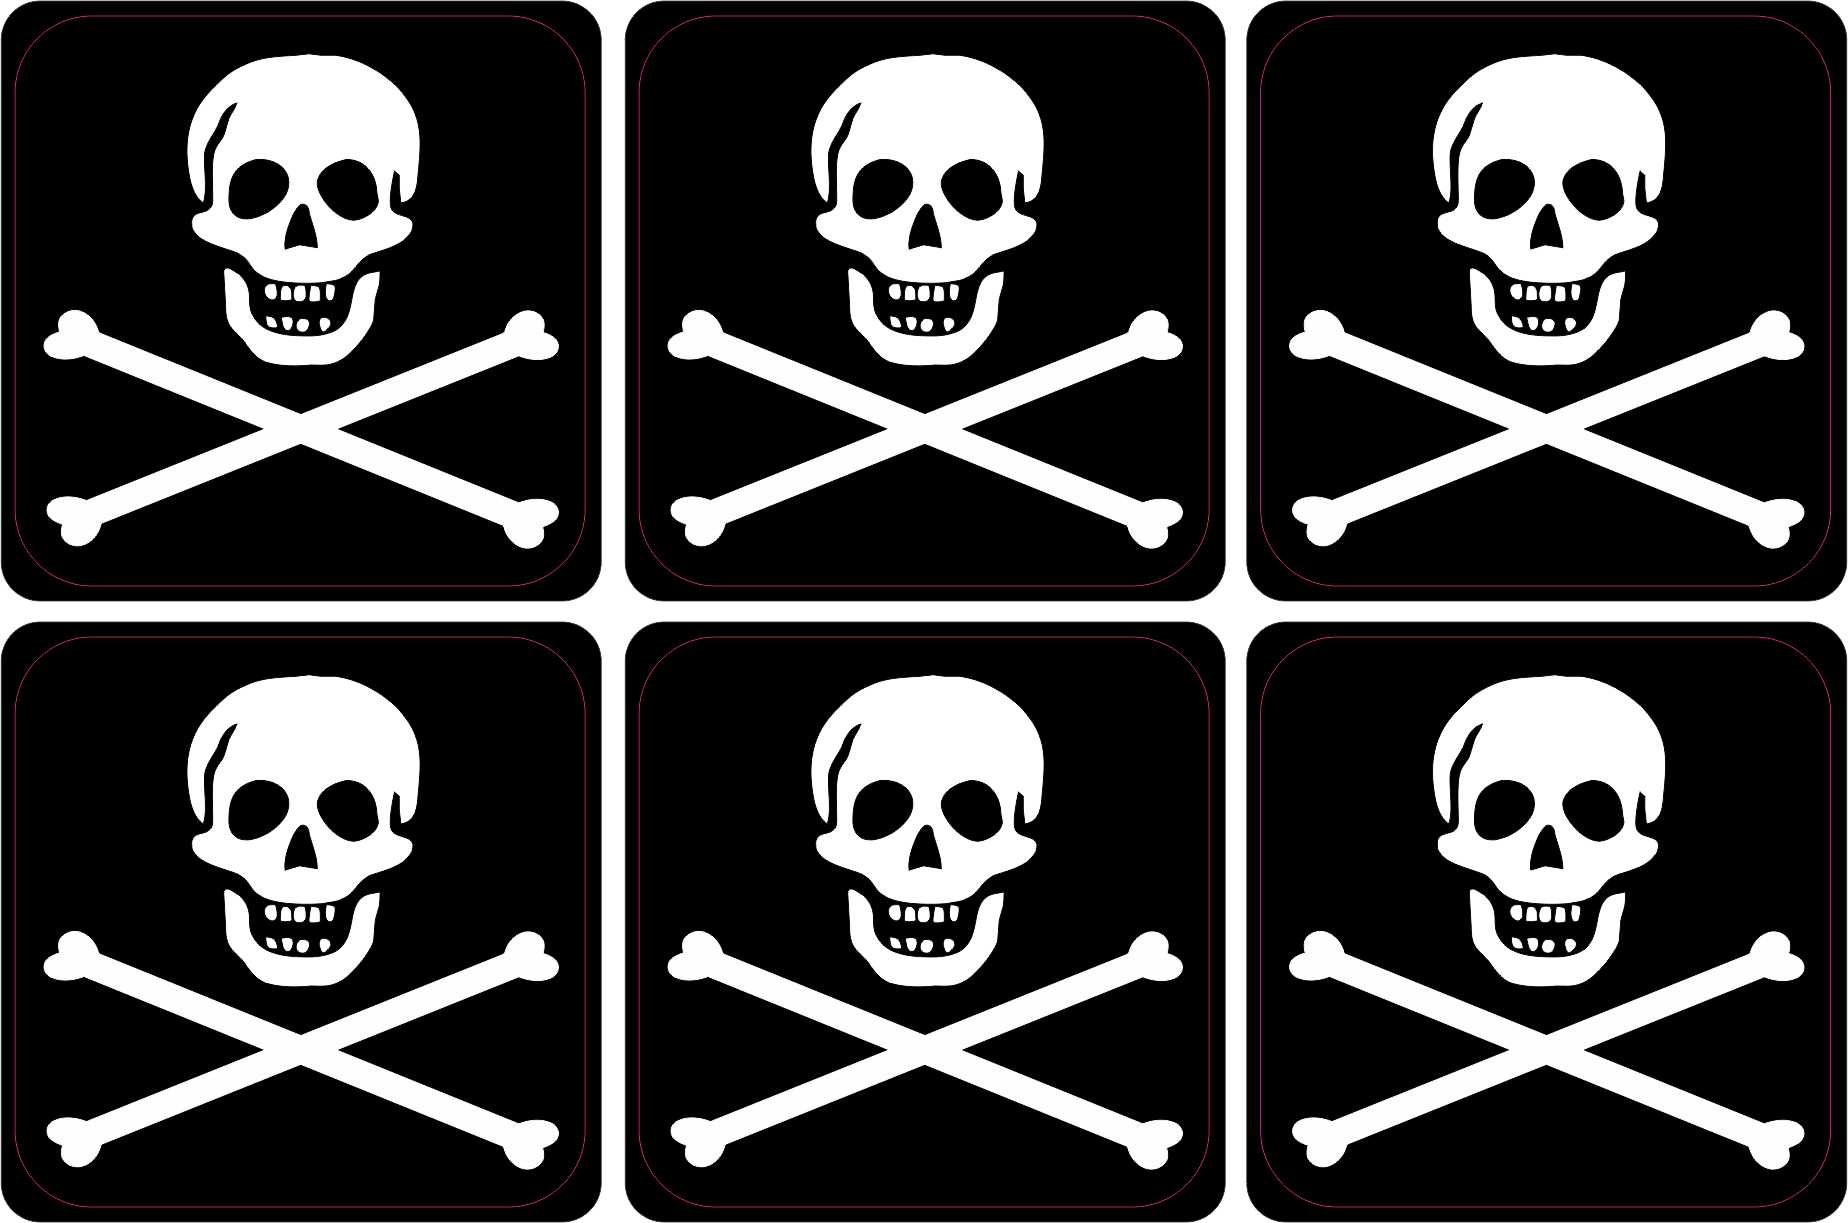 StickerTalk Jolly Roger Pirate Flag Vinyl Stickers, 1 sheet of 6 stickers,  2 inches by 2 inches each